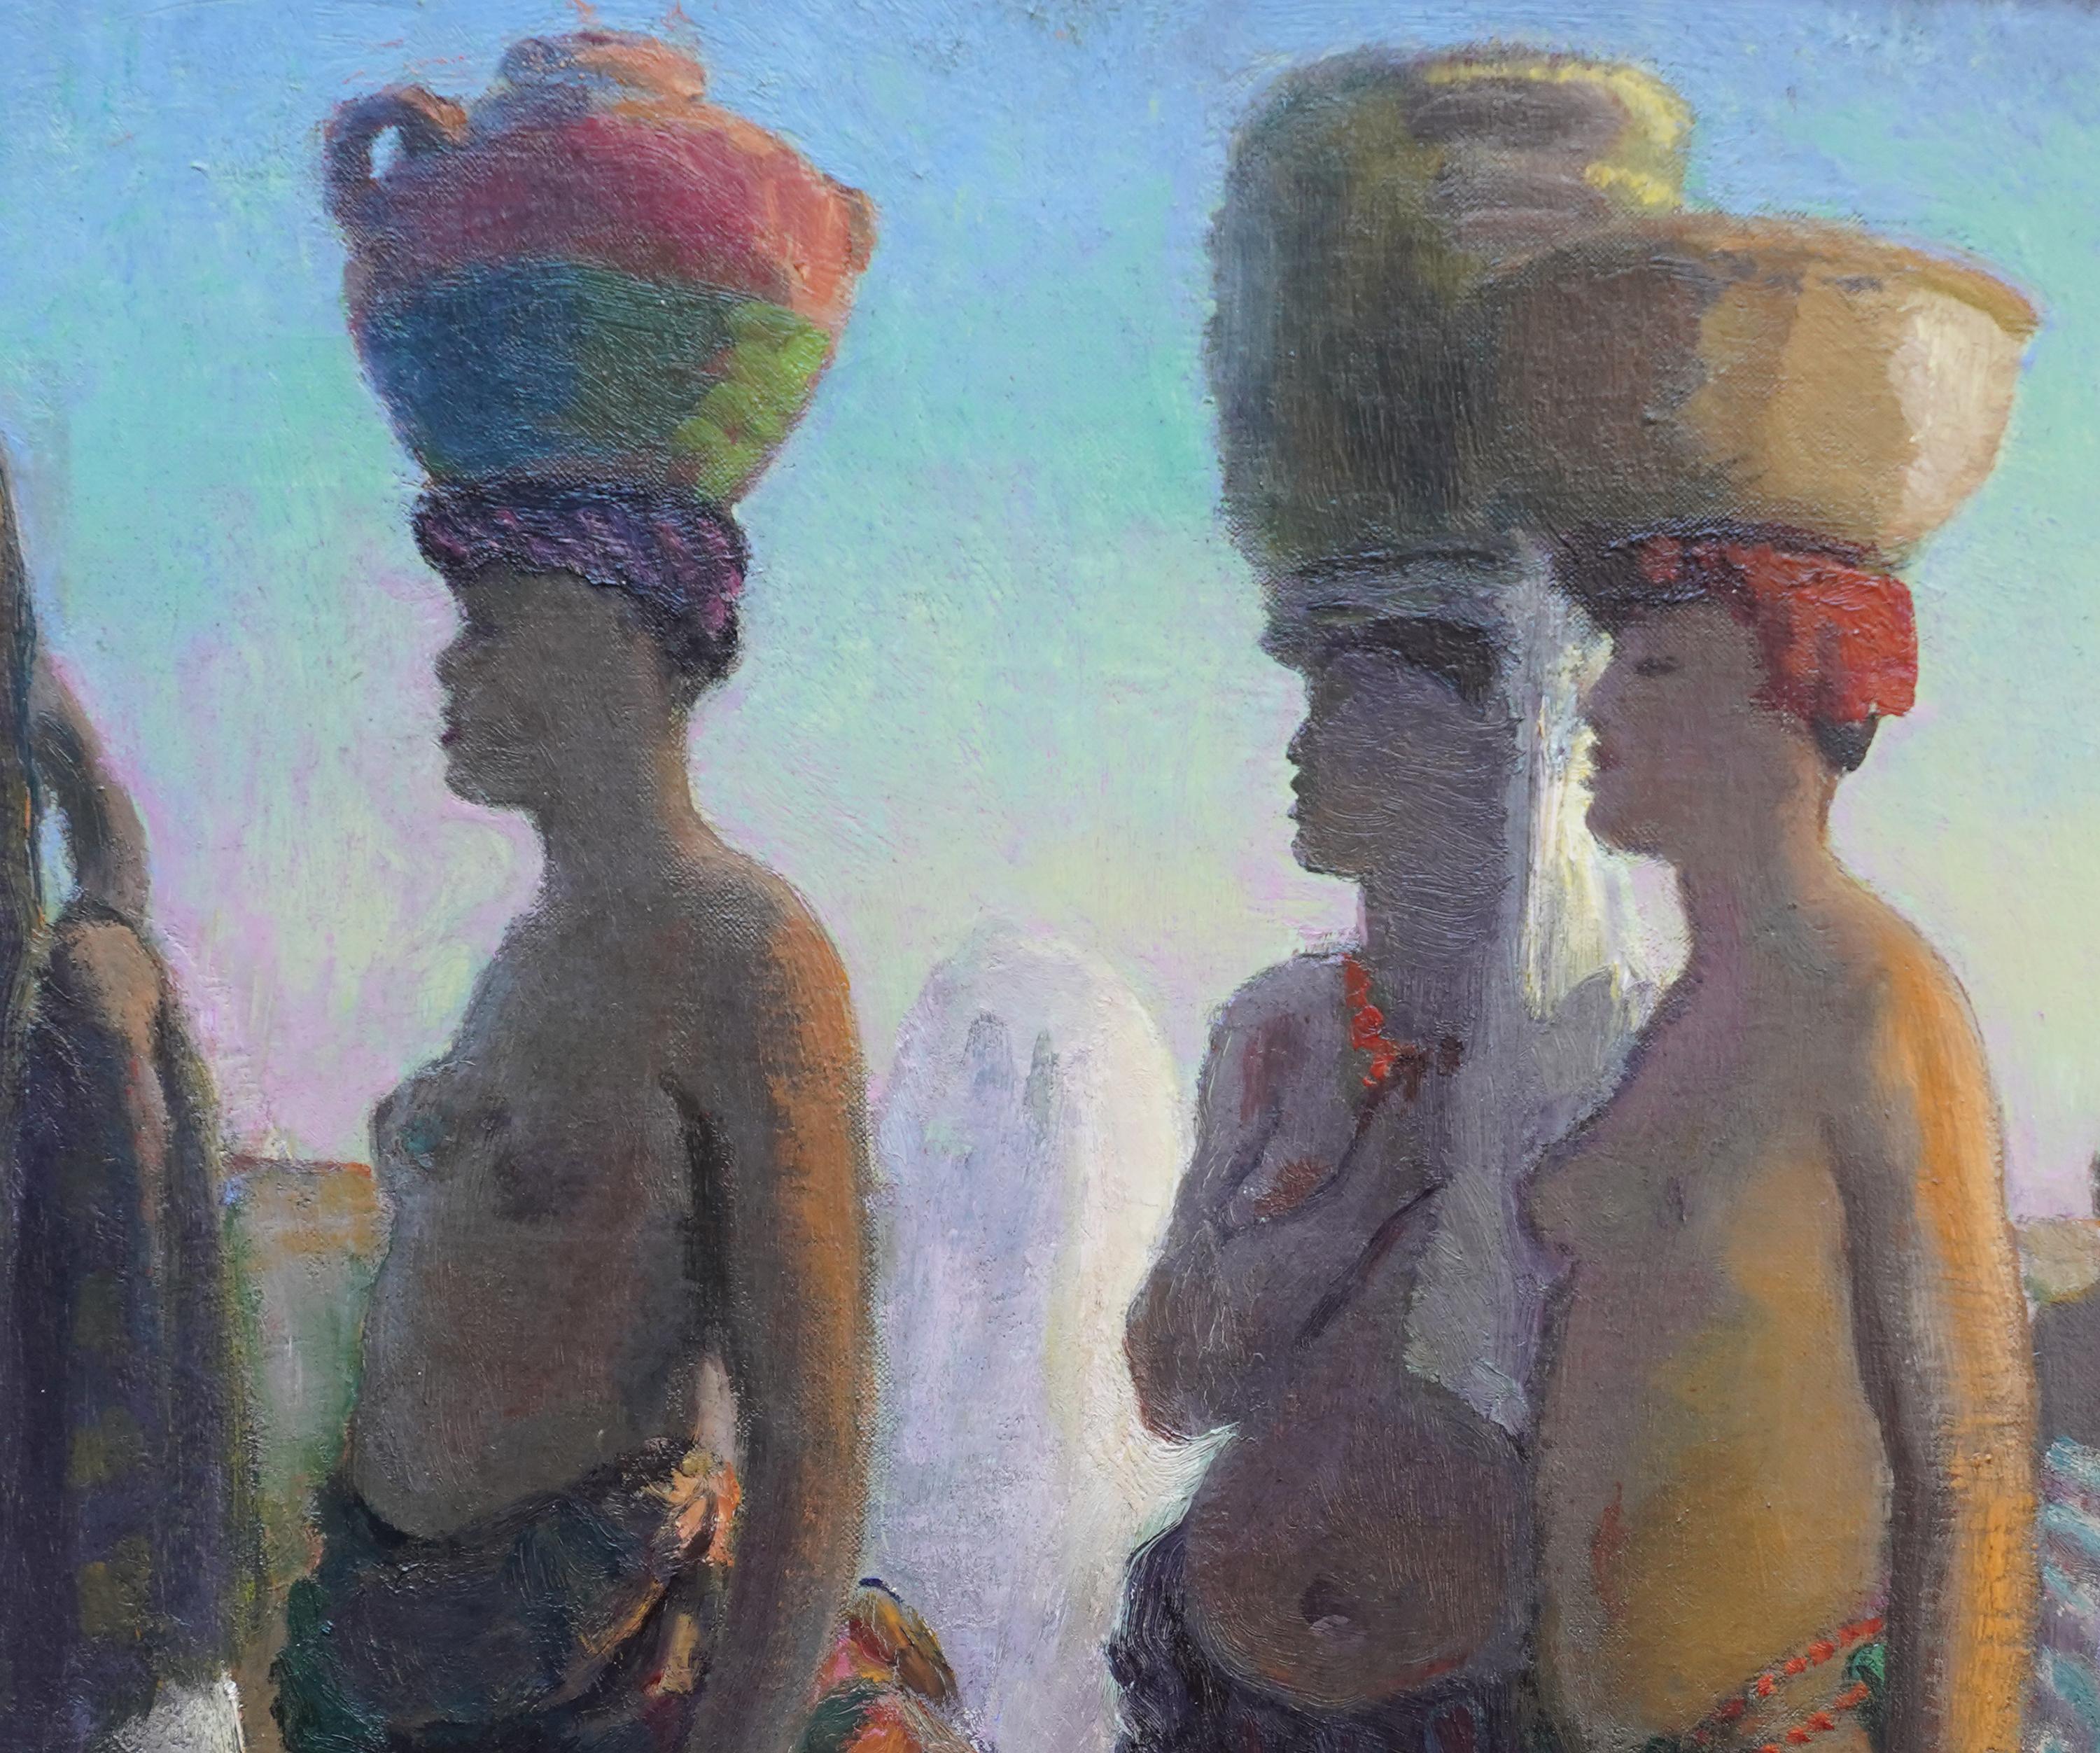 Portrait of Water Bearers, Africa - British 1920's Orientalist art oil painting - Post-Impressionist Painting by Spencer Pryse